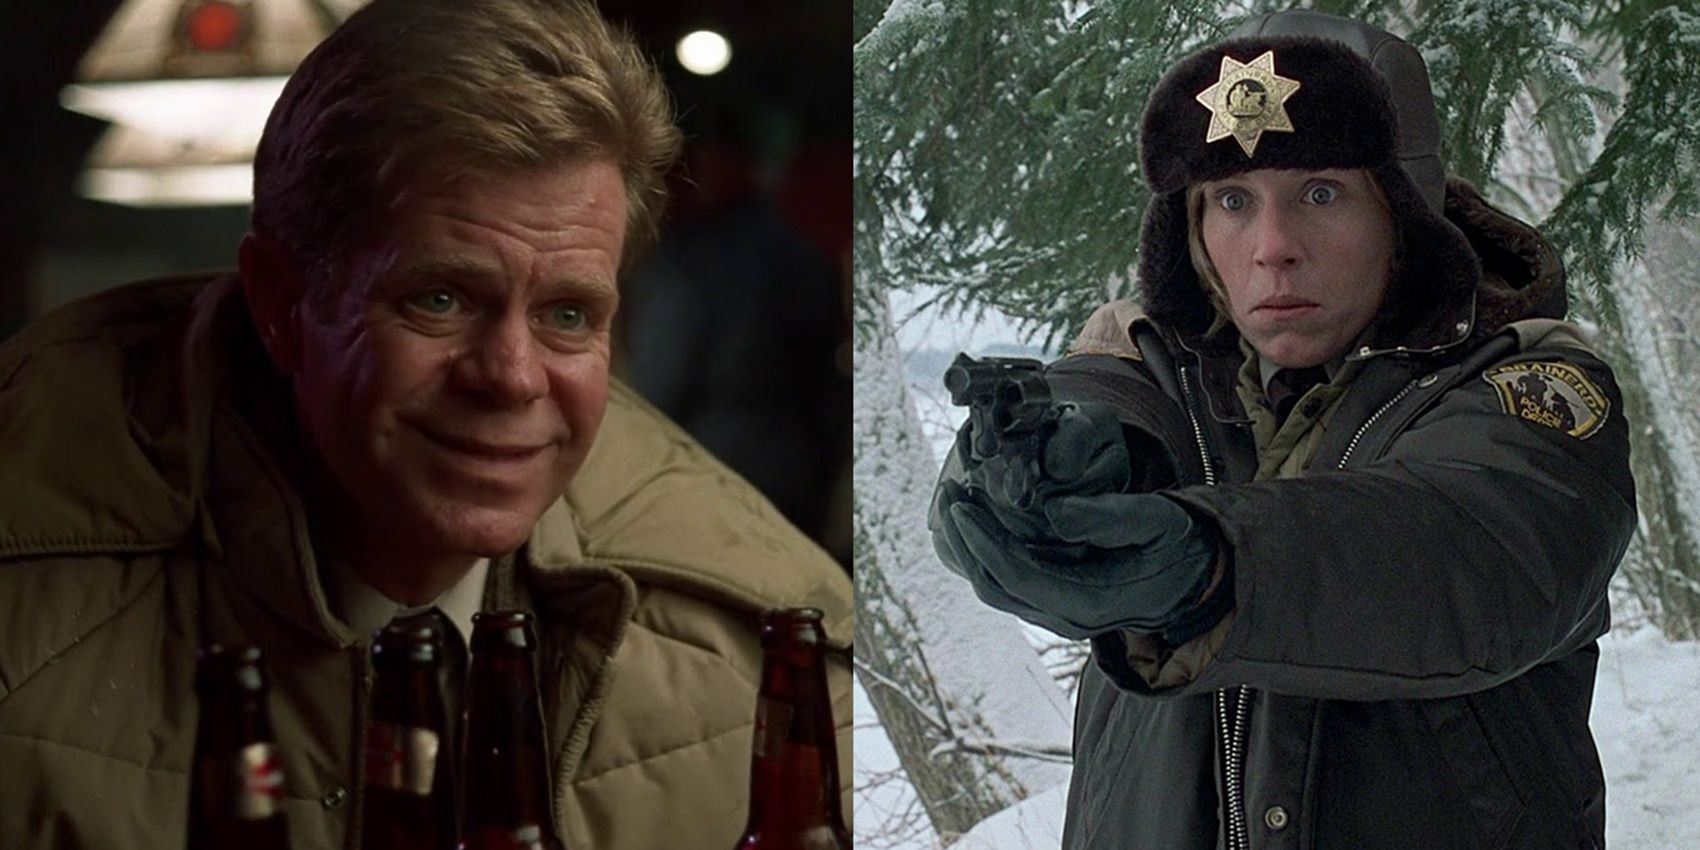 Split image of William H Macy in a bar and Frances McDormand holding a gun in Fargo